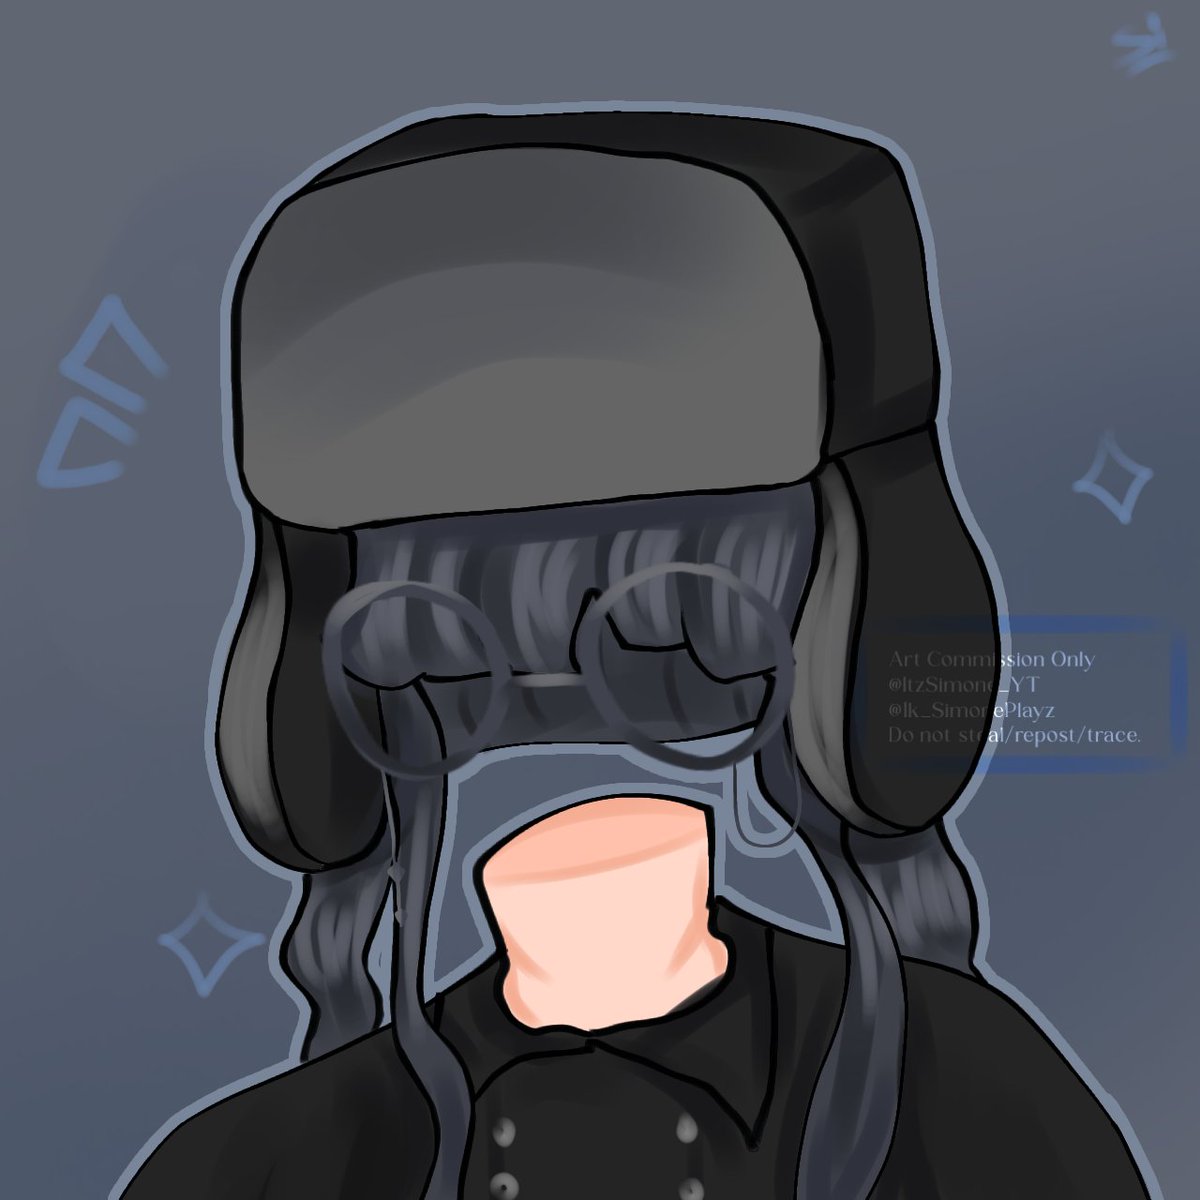 Half body Art commission for @jimahnie ❕
Thanks for ordering ^^

#roblox #RTC #rxc #robloxart #robloxartists #artmoots #robloxdevs #robloxgfx #robuxcommission